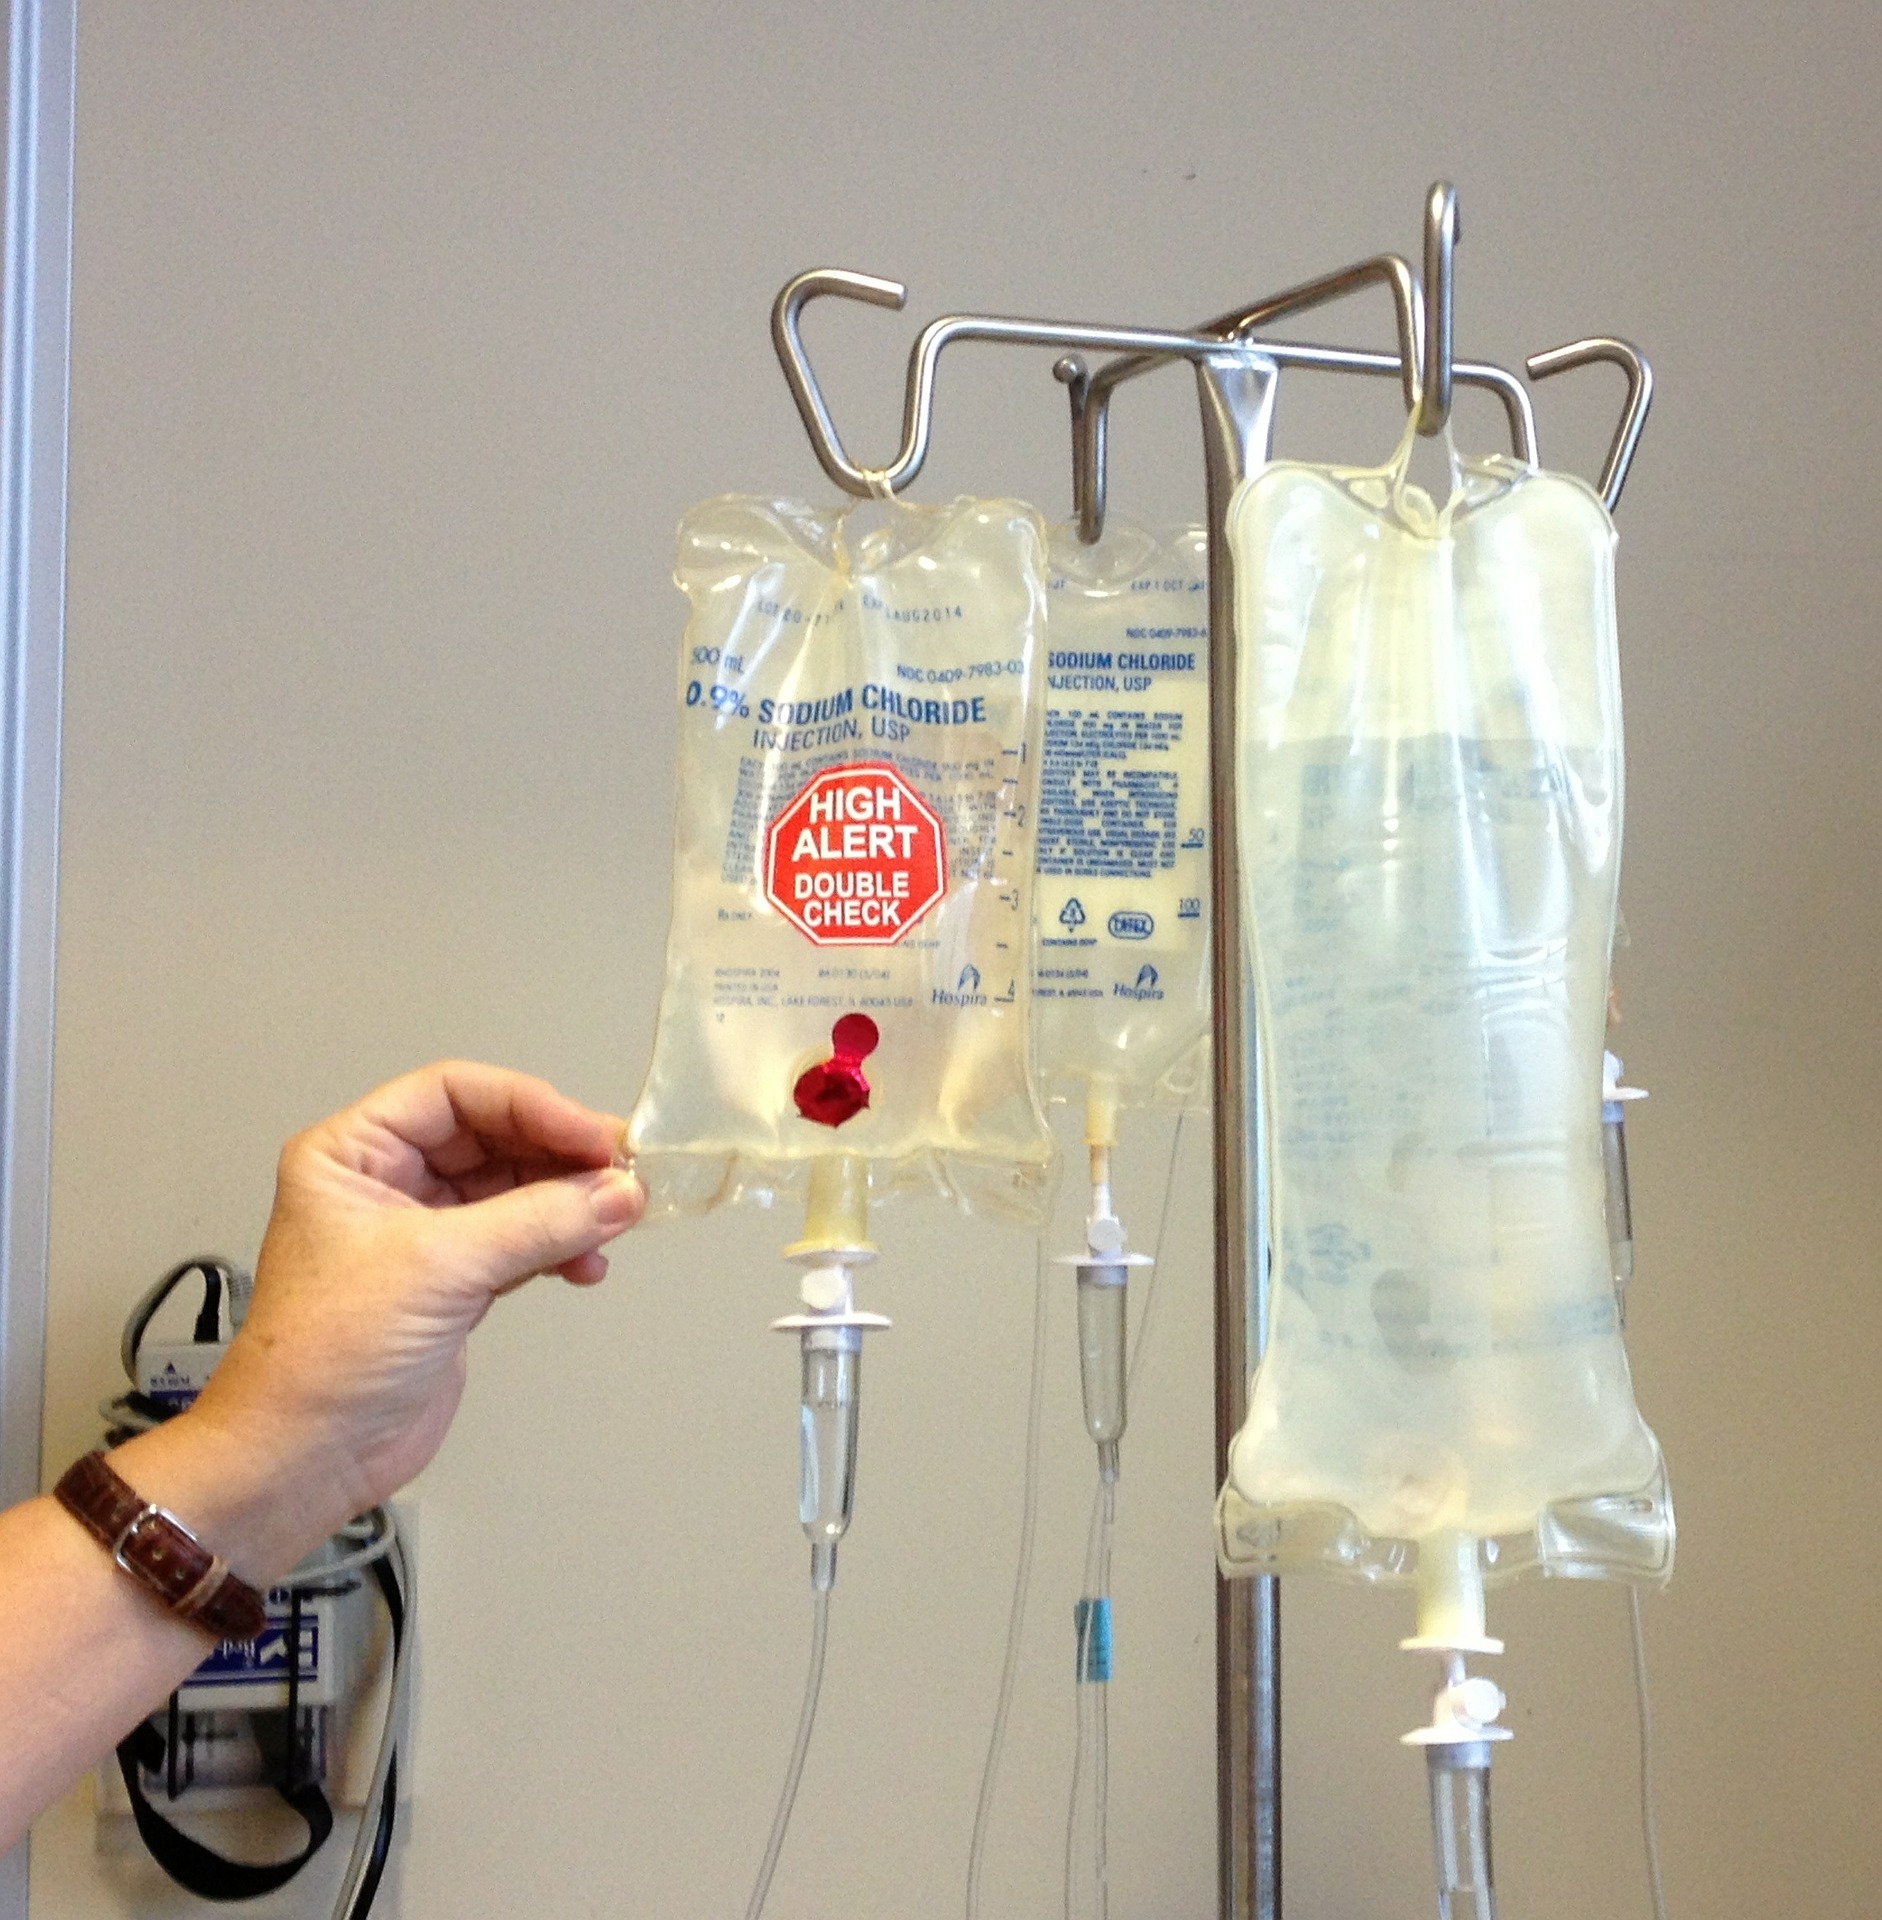 A Healthy Dose of Cancer Chemo and a New Cycle